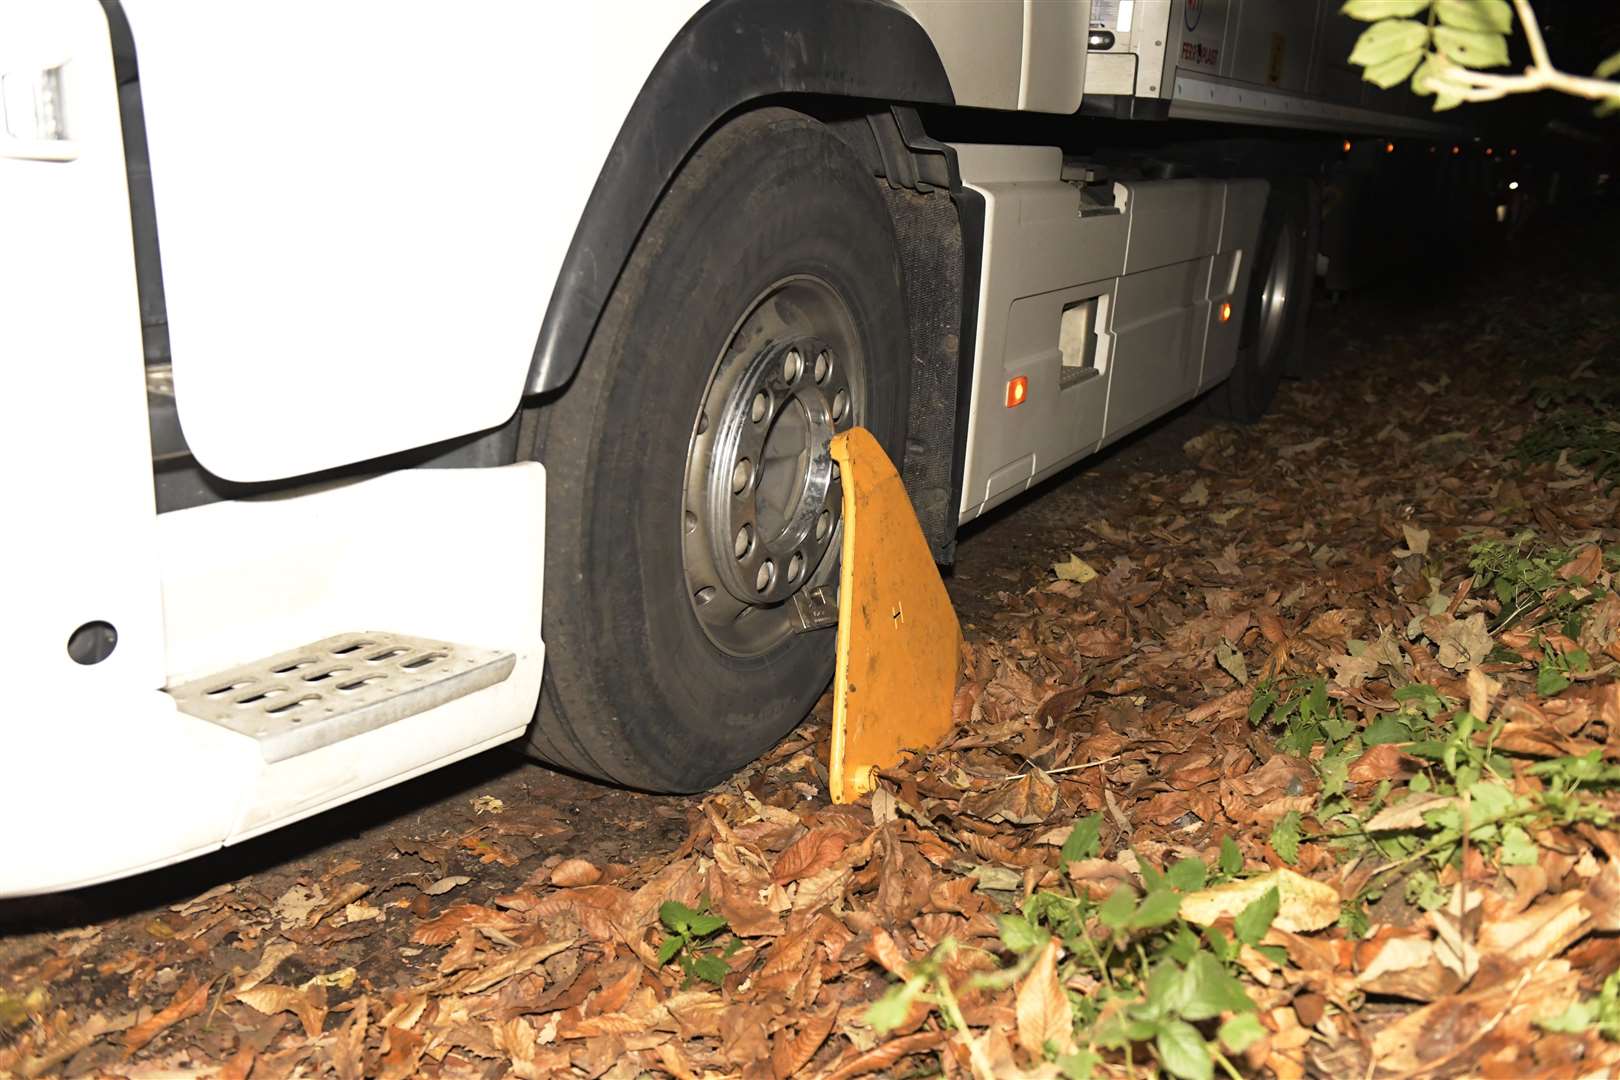 Ashford became the first place in England with the power to use clamps to discourage nuisance lorry drivers parking overnight